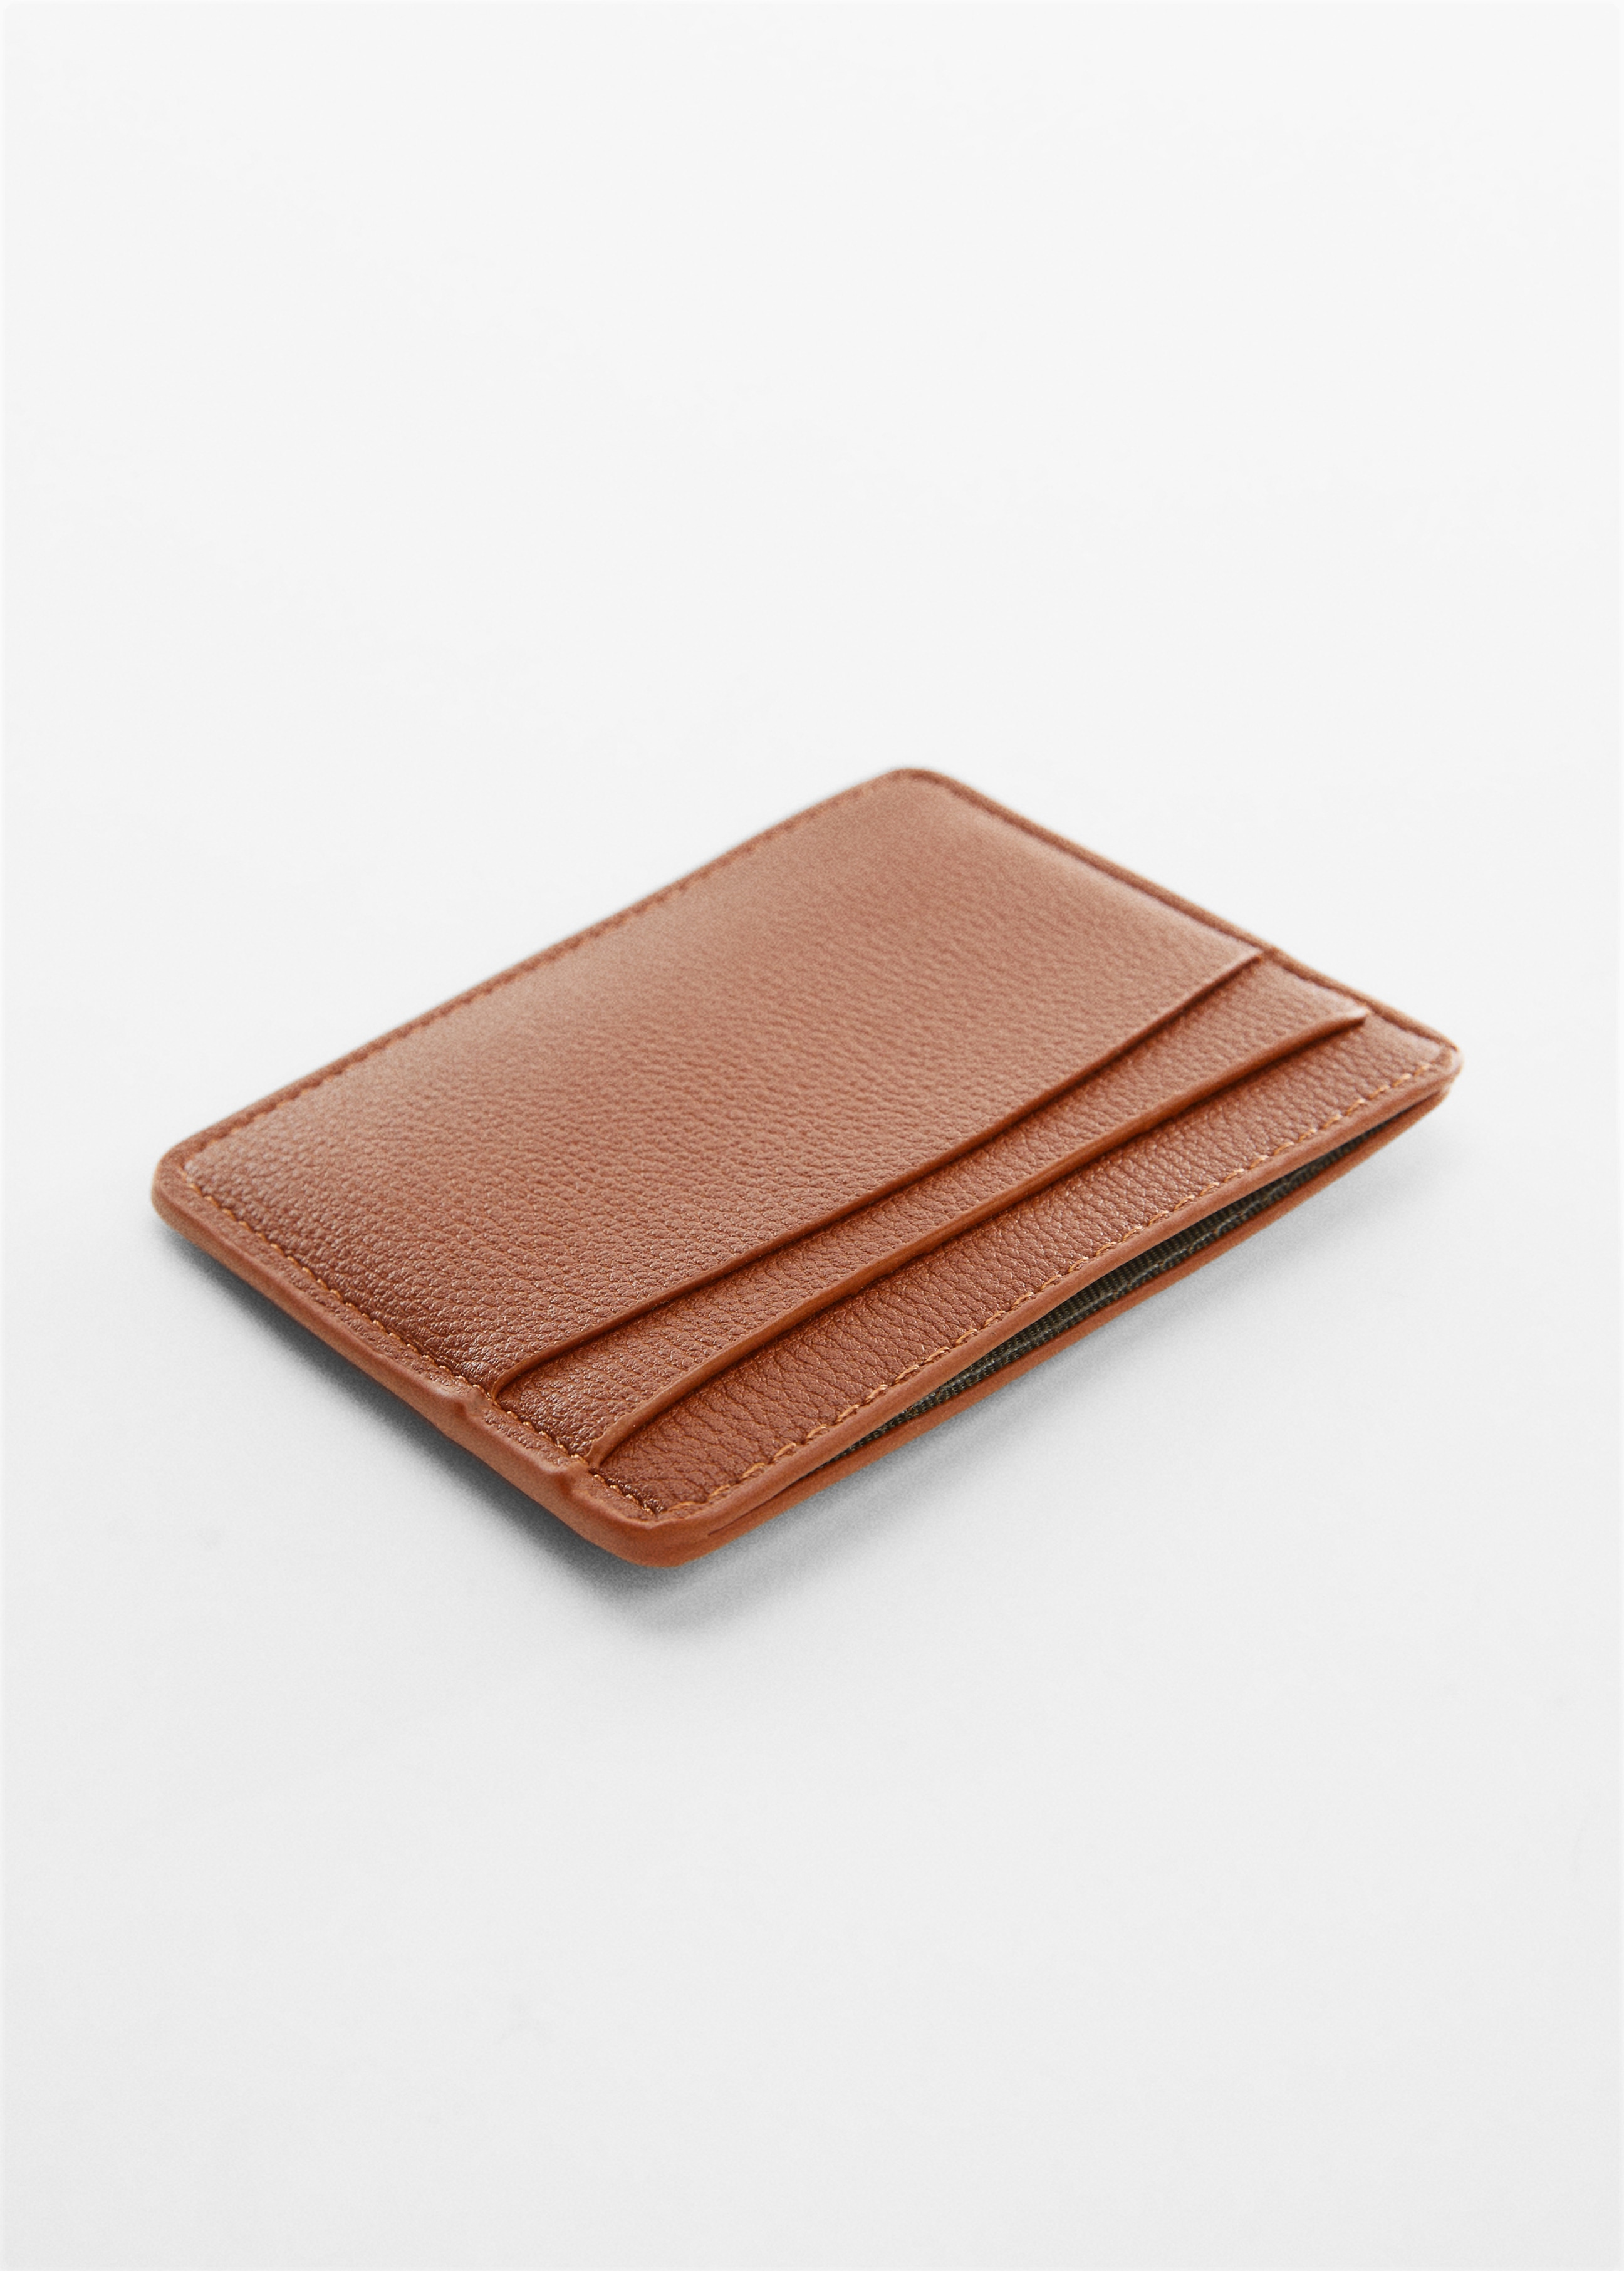 Anti-contactless leather-effect card holder - Medium plane